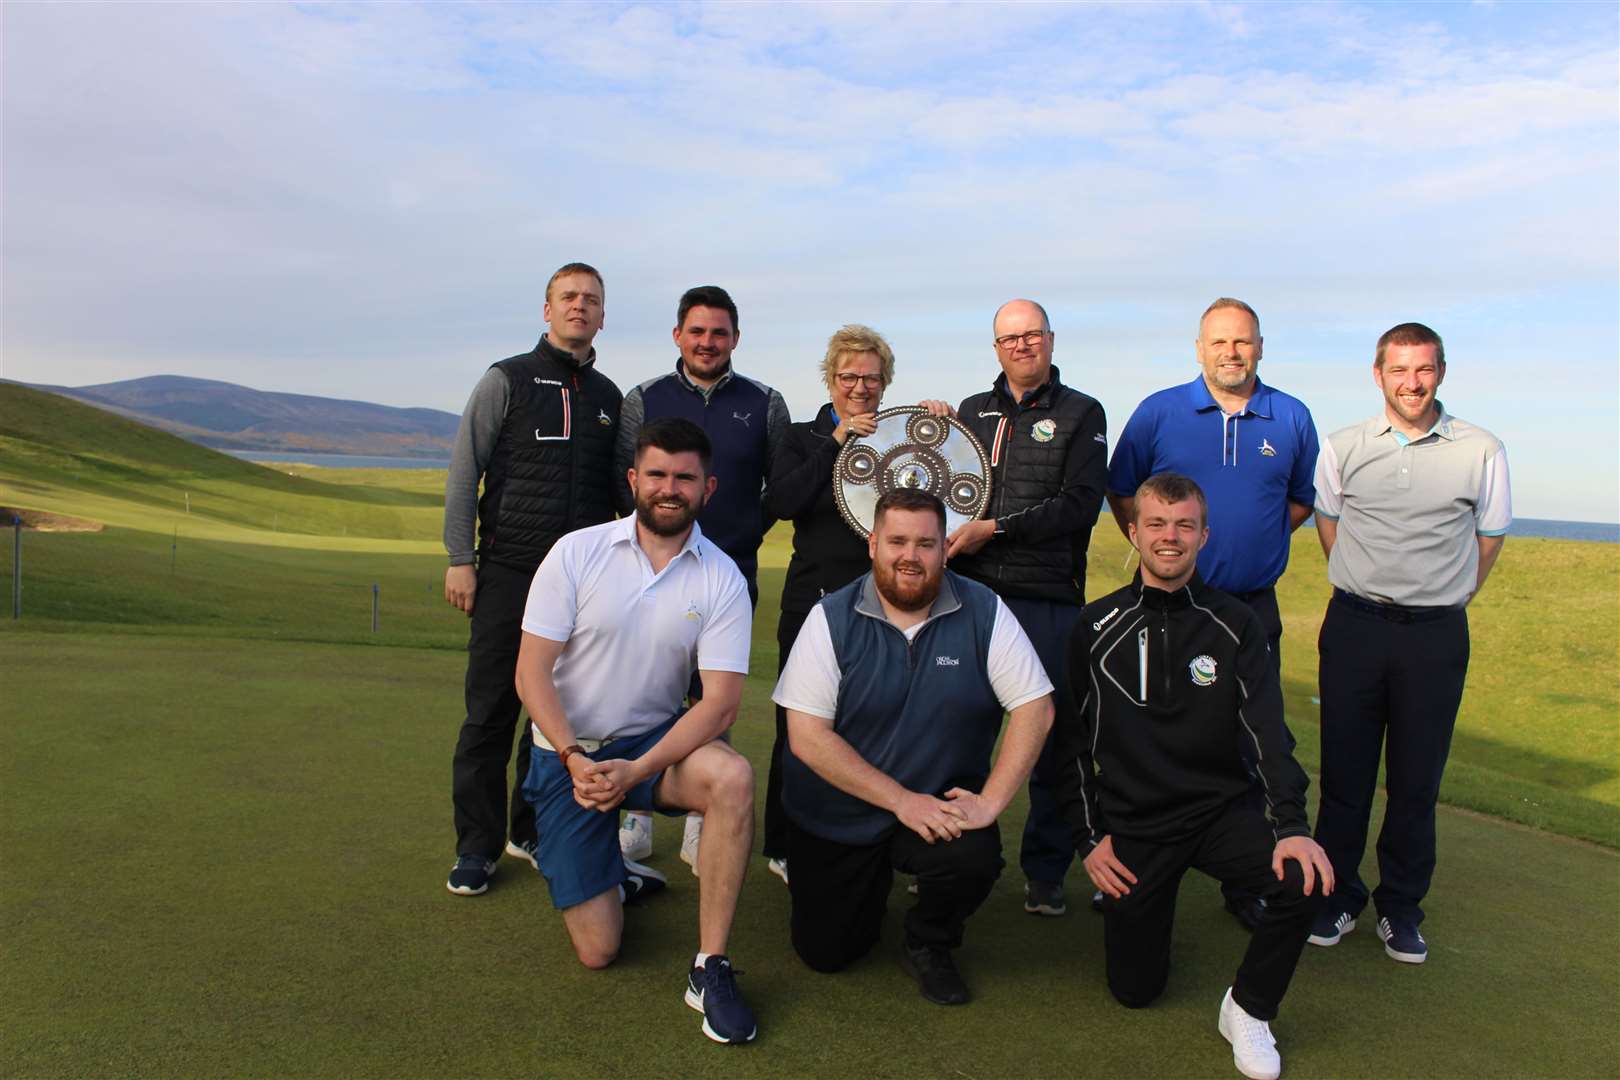 Brora club captain Anne Clarke presents team captain Roddy Cameron with the targe, along with team mates Graham Grant, Alistair MacDonald, James MacBeath, and Dougie Thorburn. Front – Calum Stewart, Owen MacLennan and Stuart Murray.